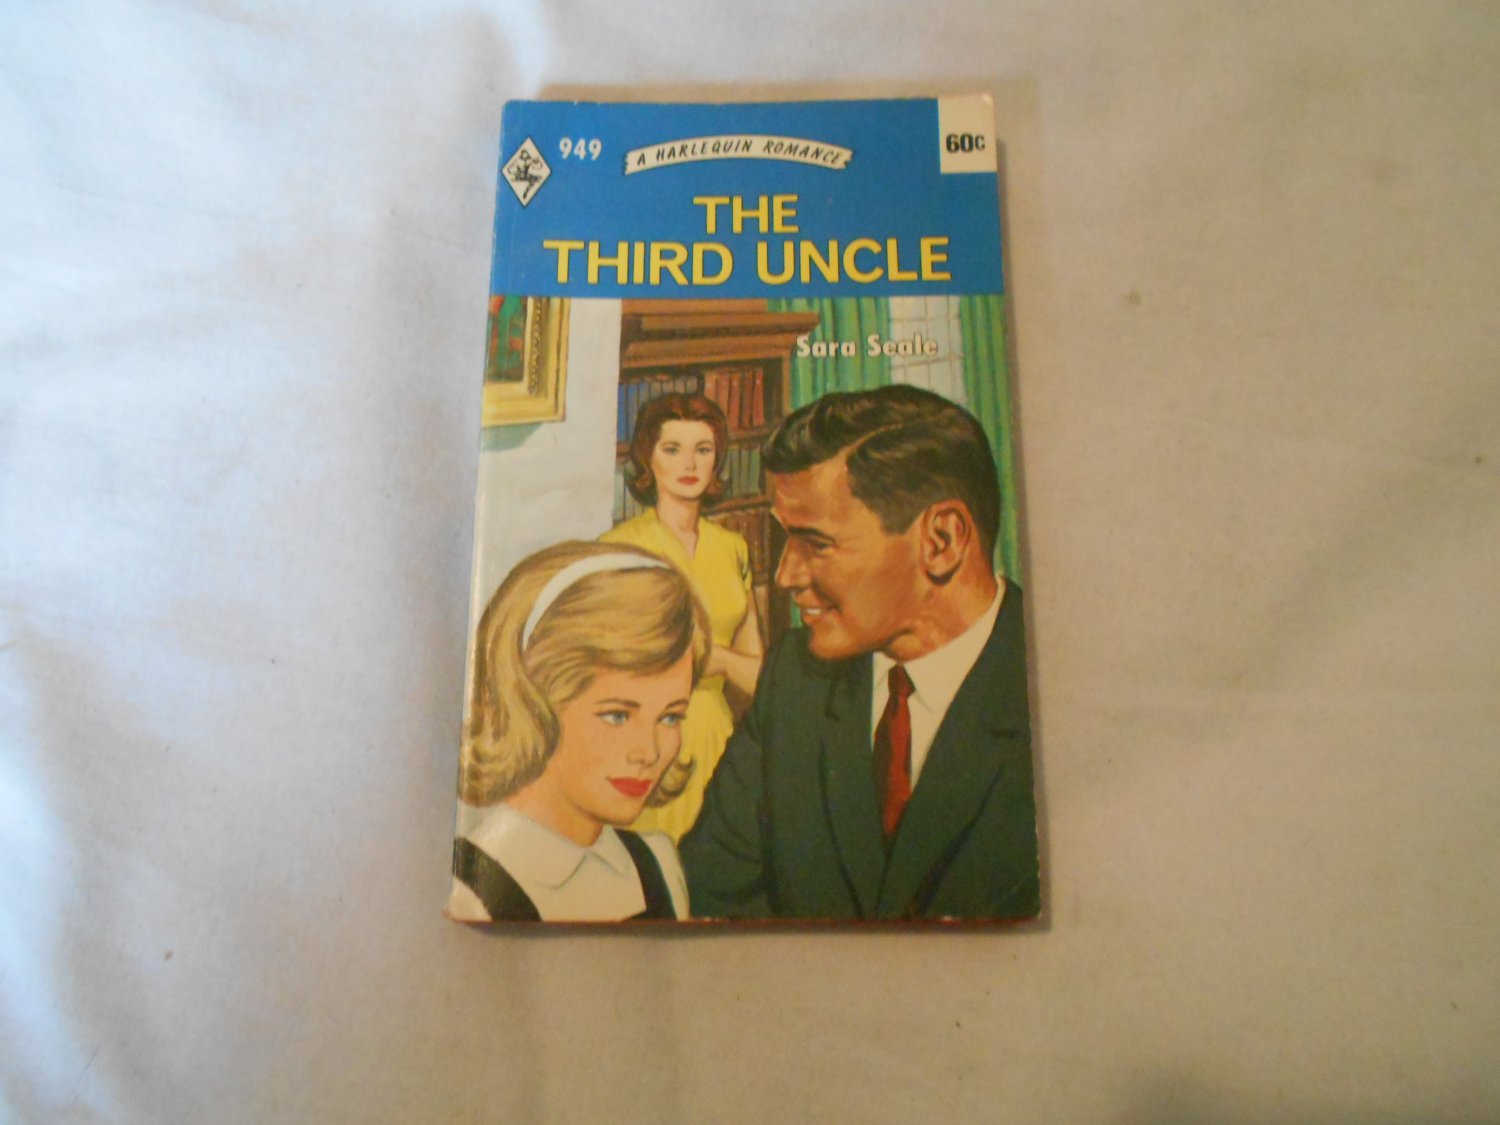 The Third Uncle by Sara Seale (1974) (143) Harlequin Romance #949